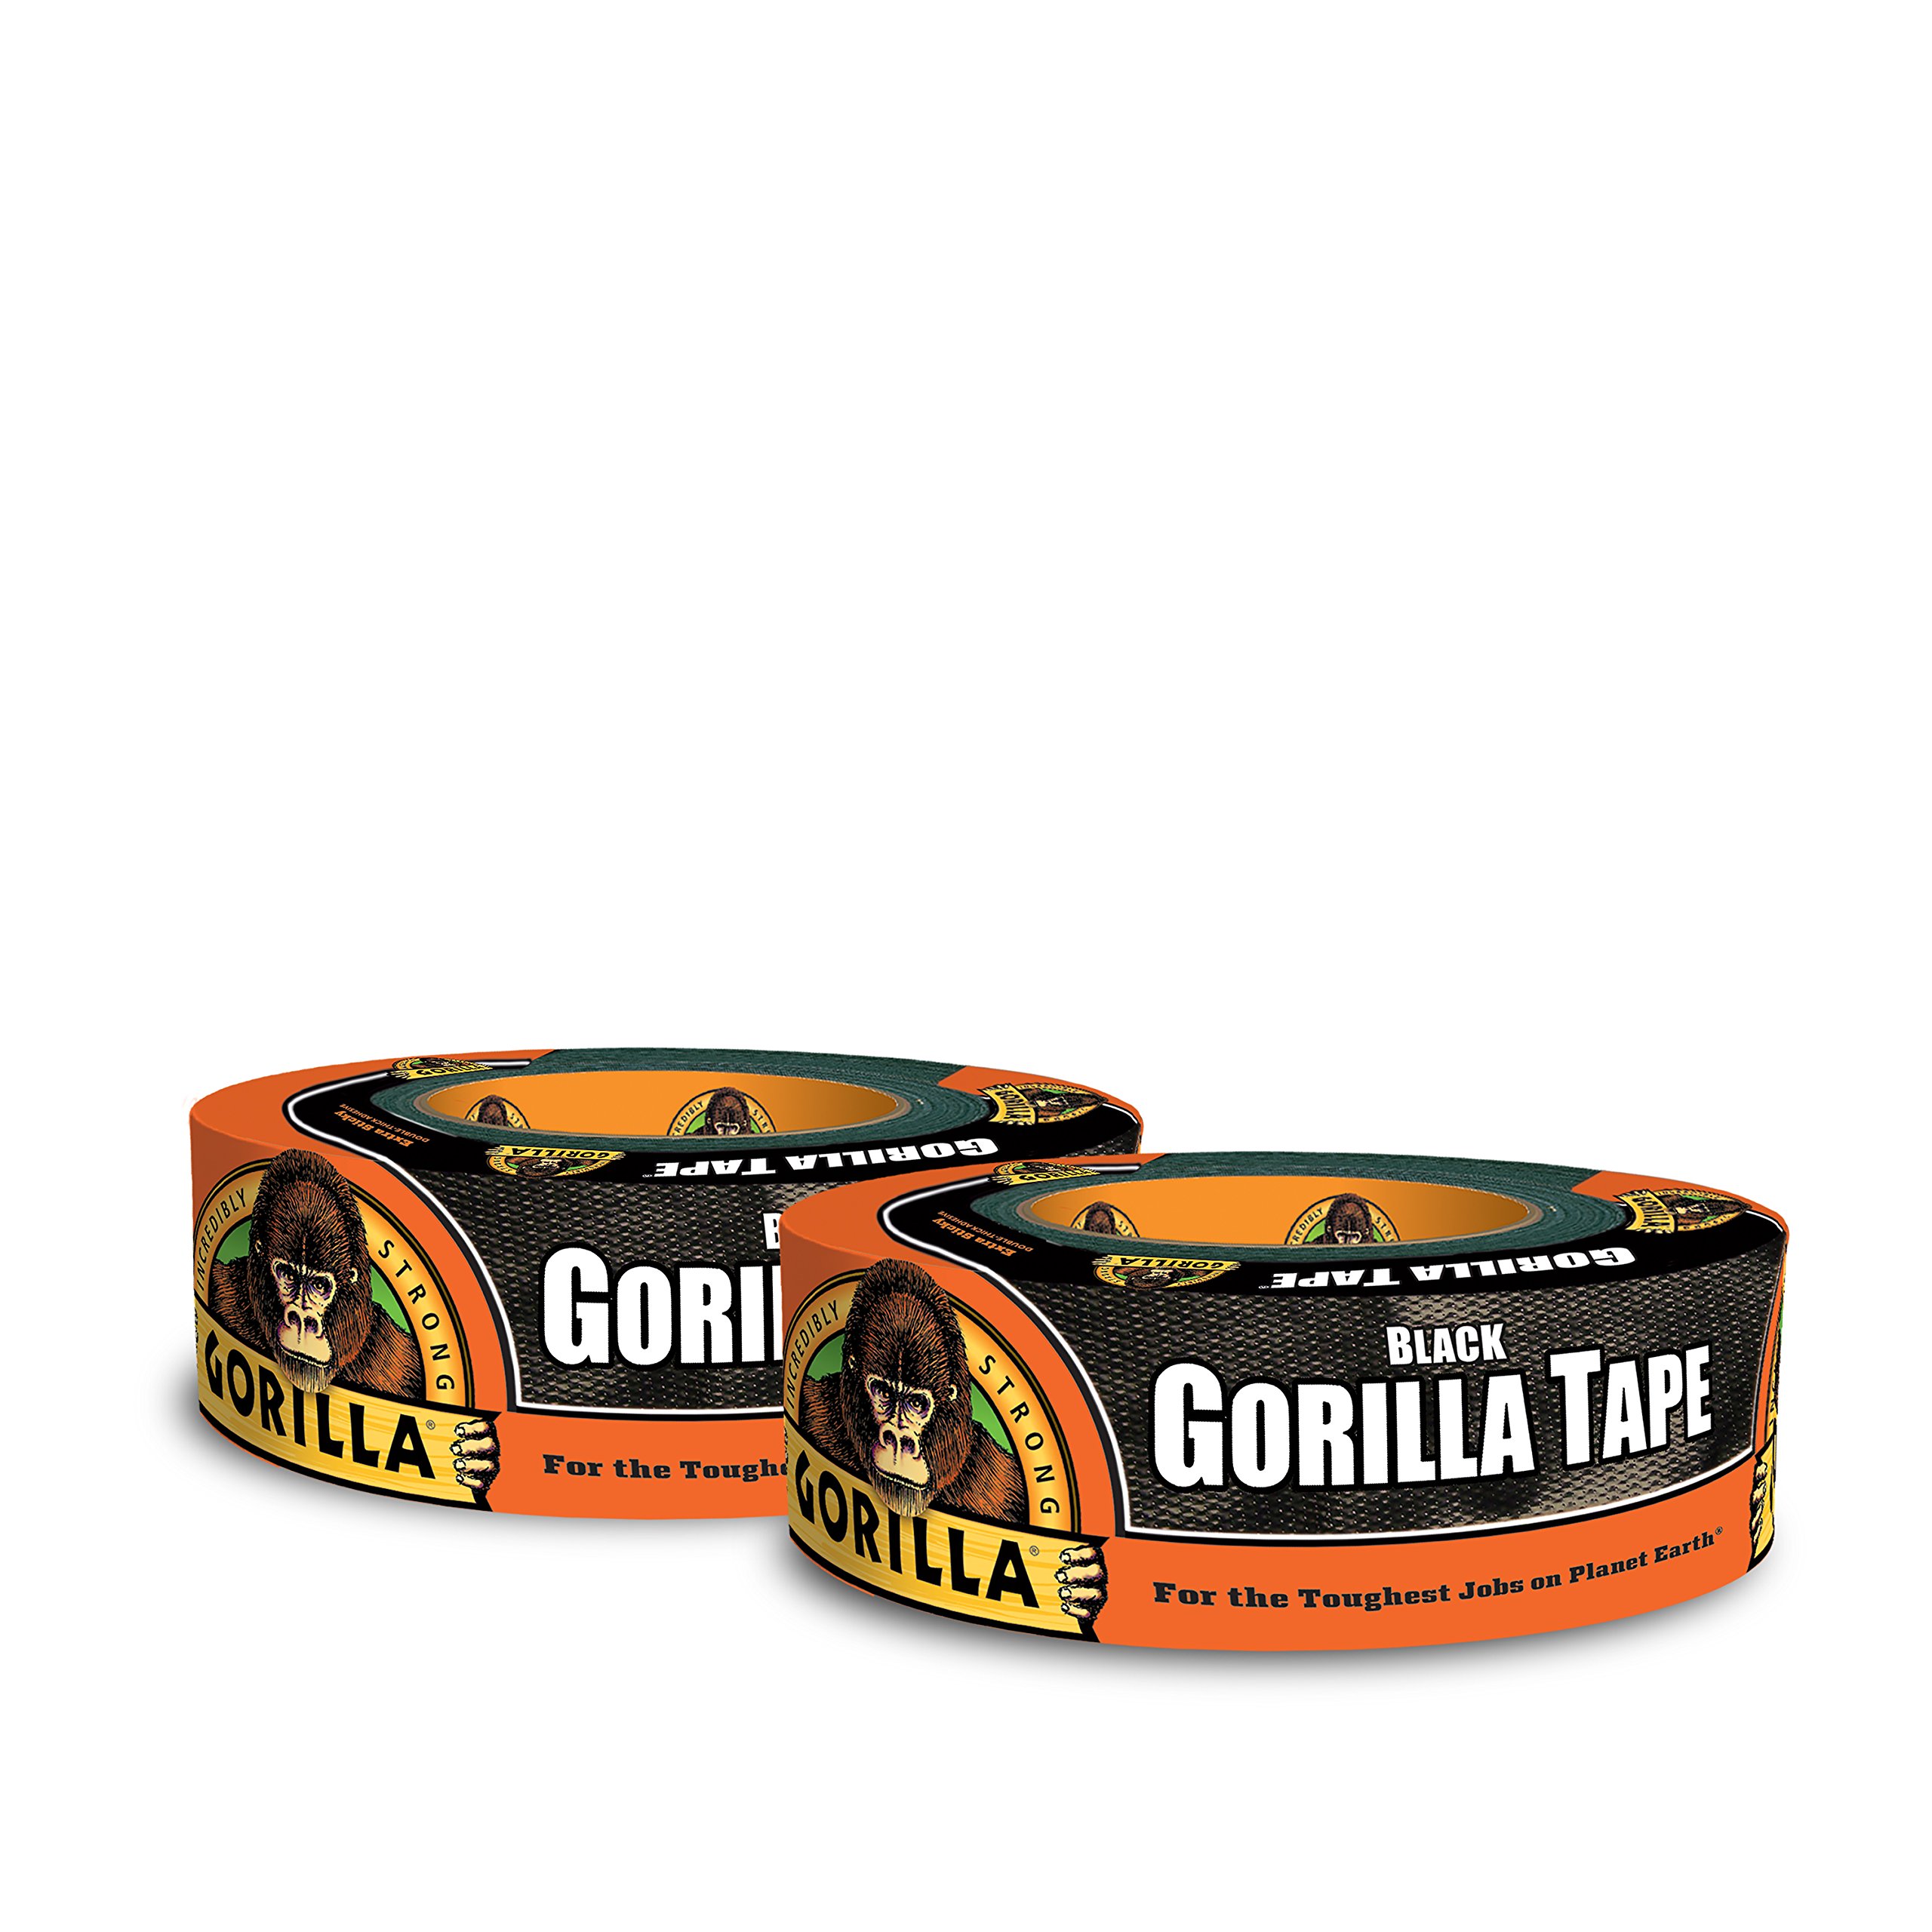 Gorilla Tape, White Duct Tape, 1.88 x 10 yd, White, (Pack of 6)